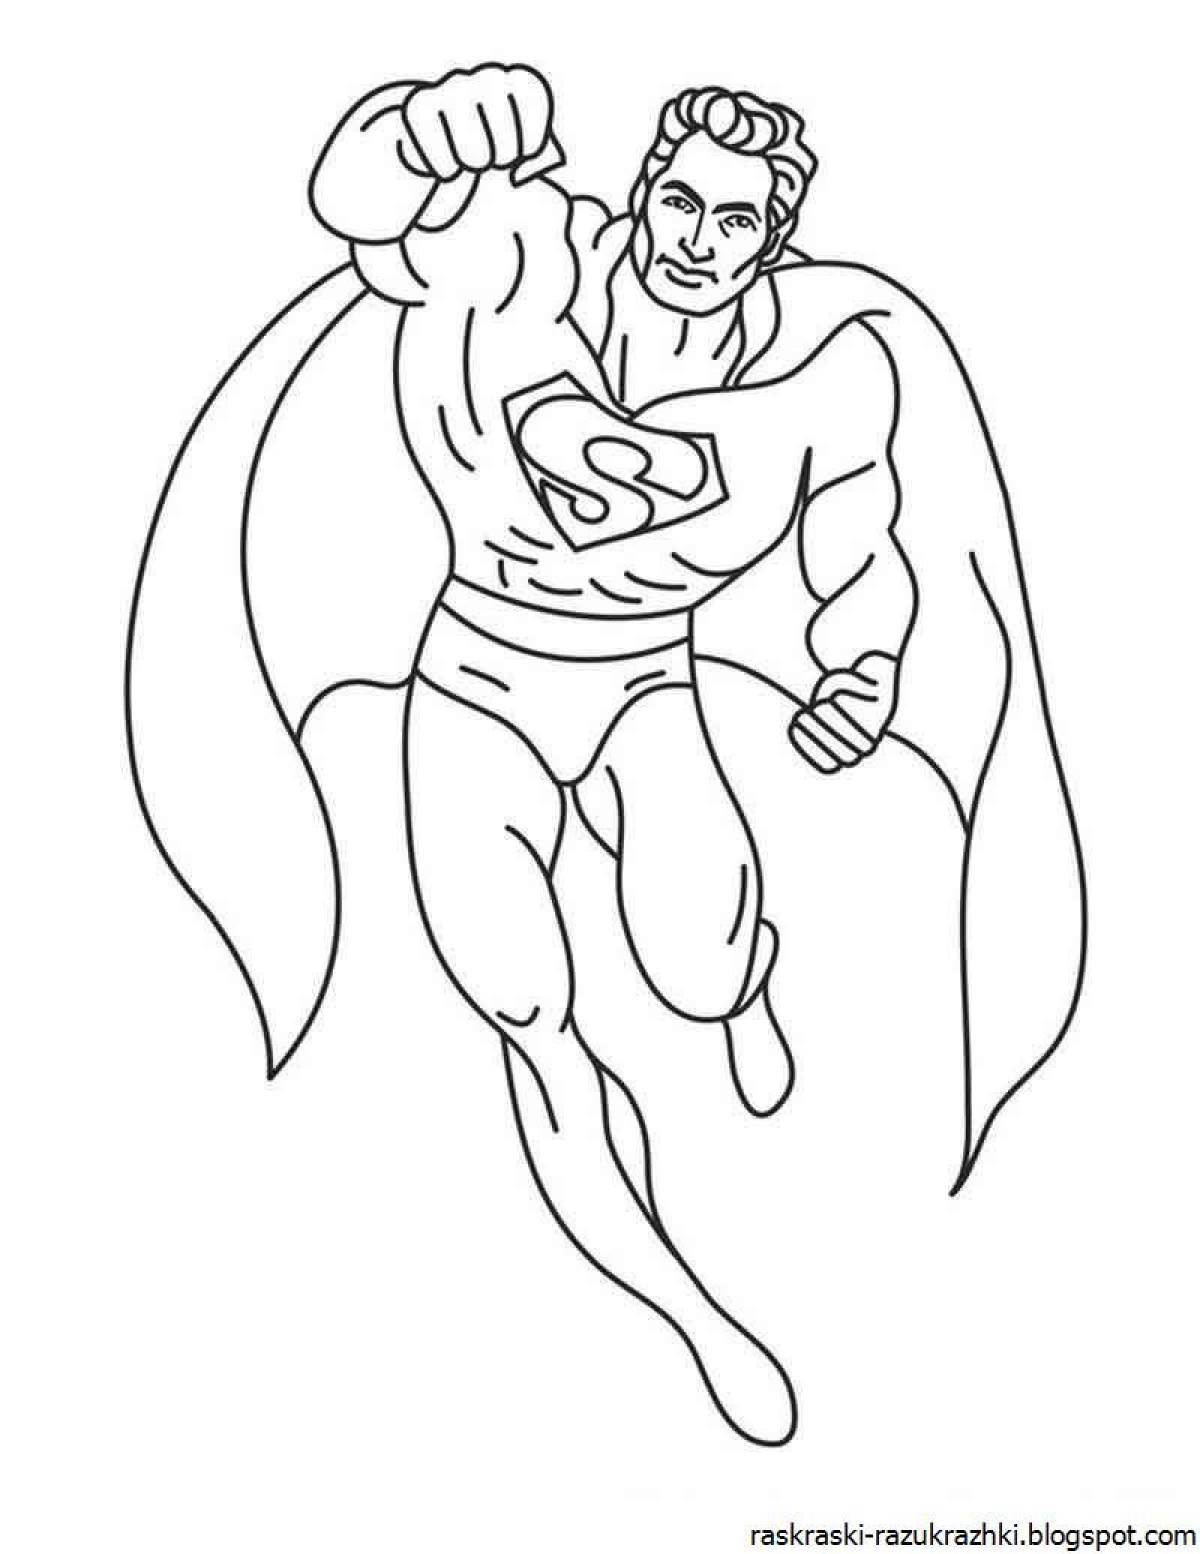 Great superheroes coloring pages for kids